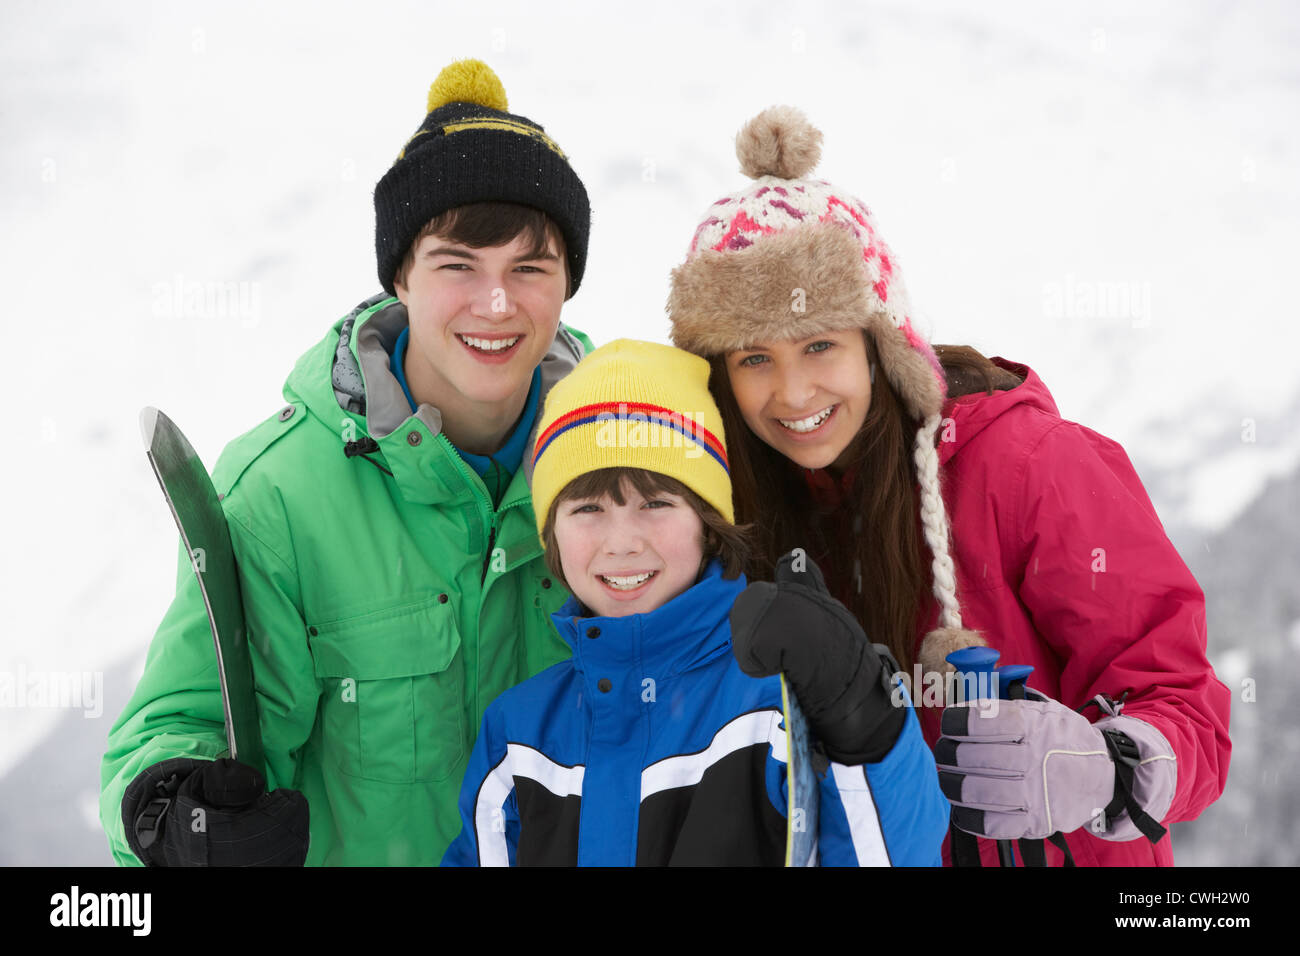 Group Of Children On Ski Holiday In Mountains Stock Photo